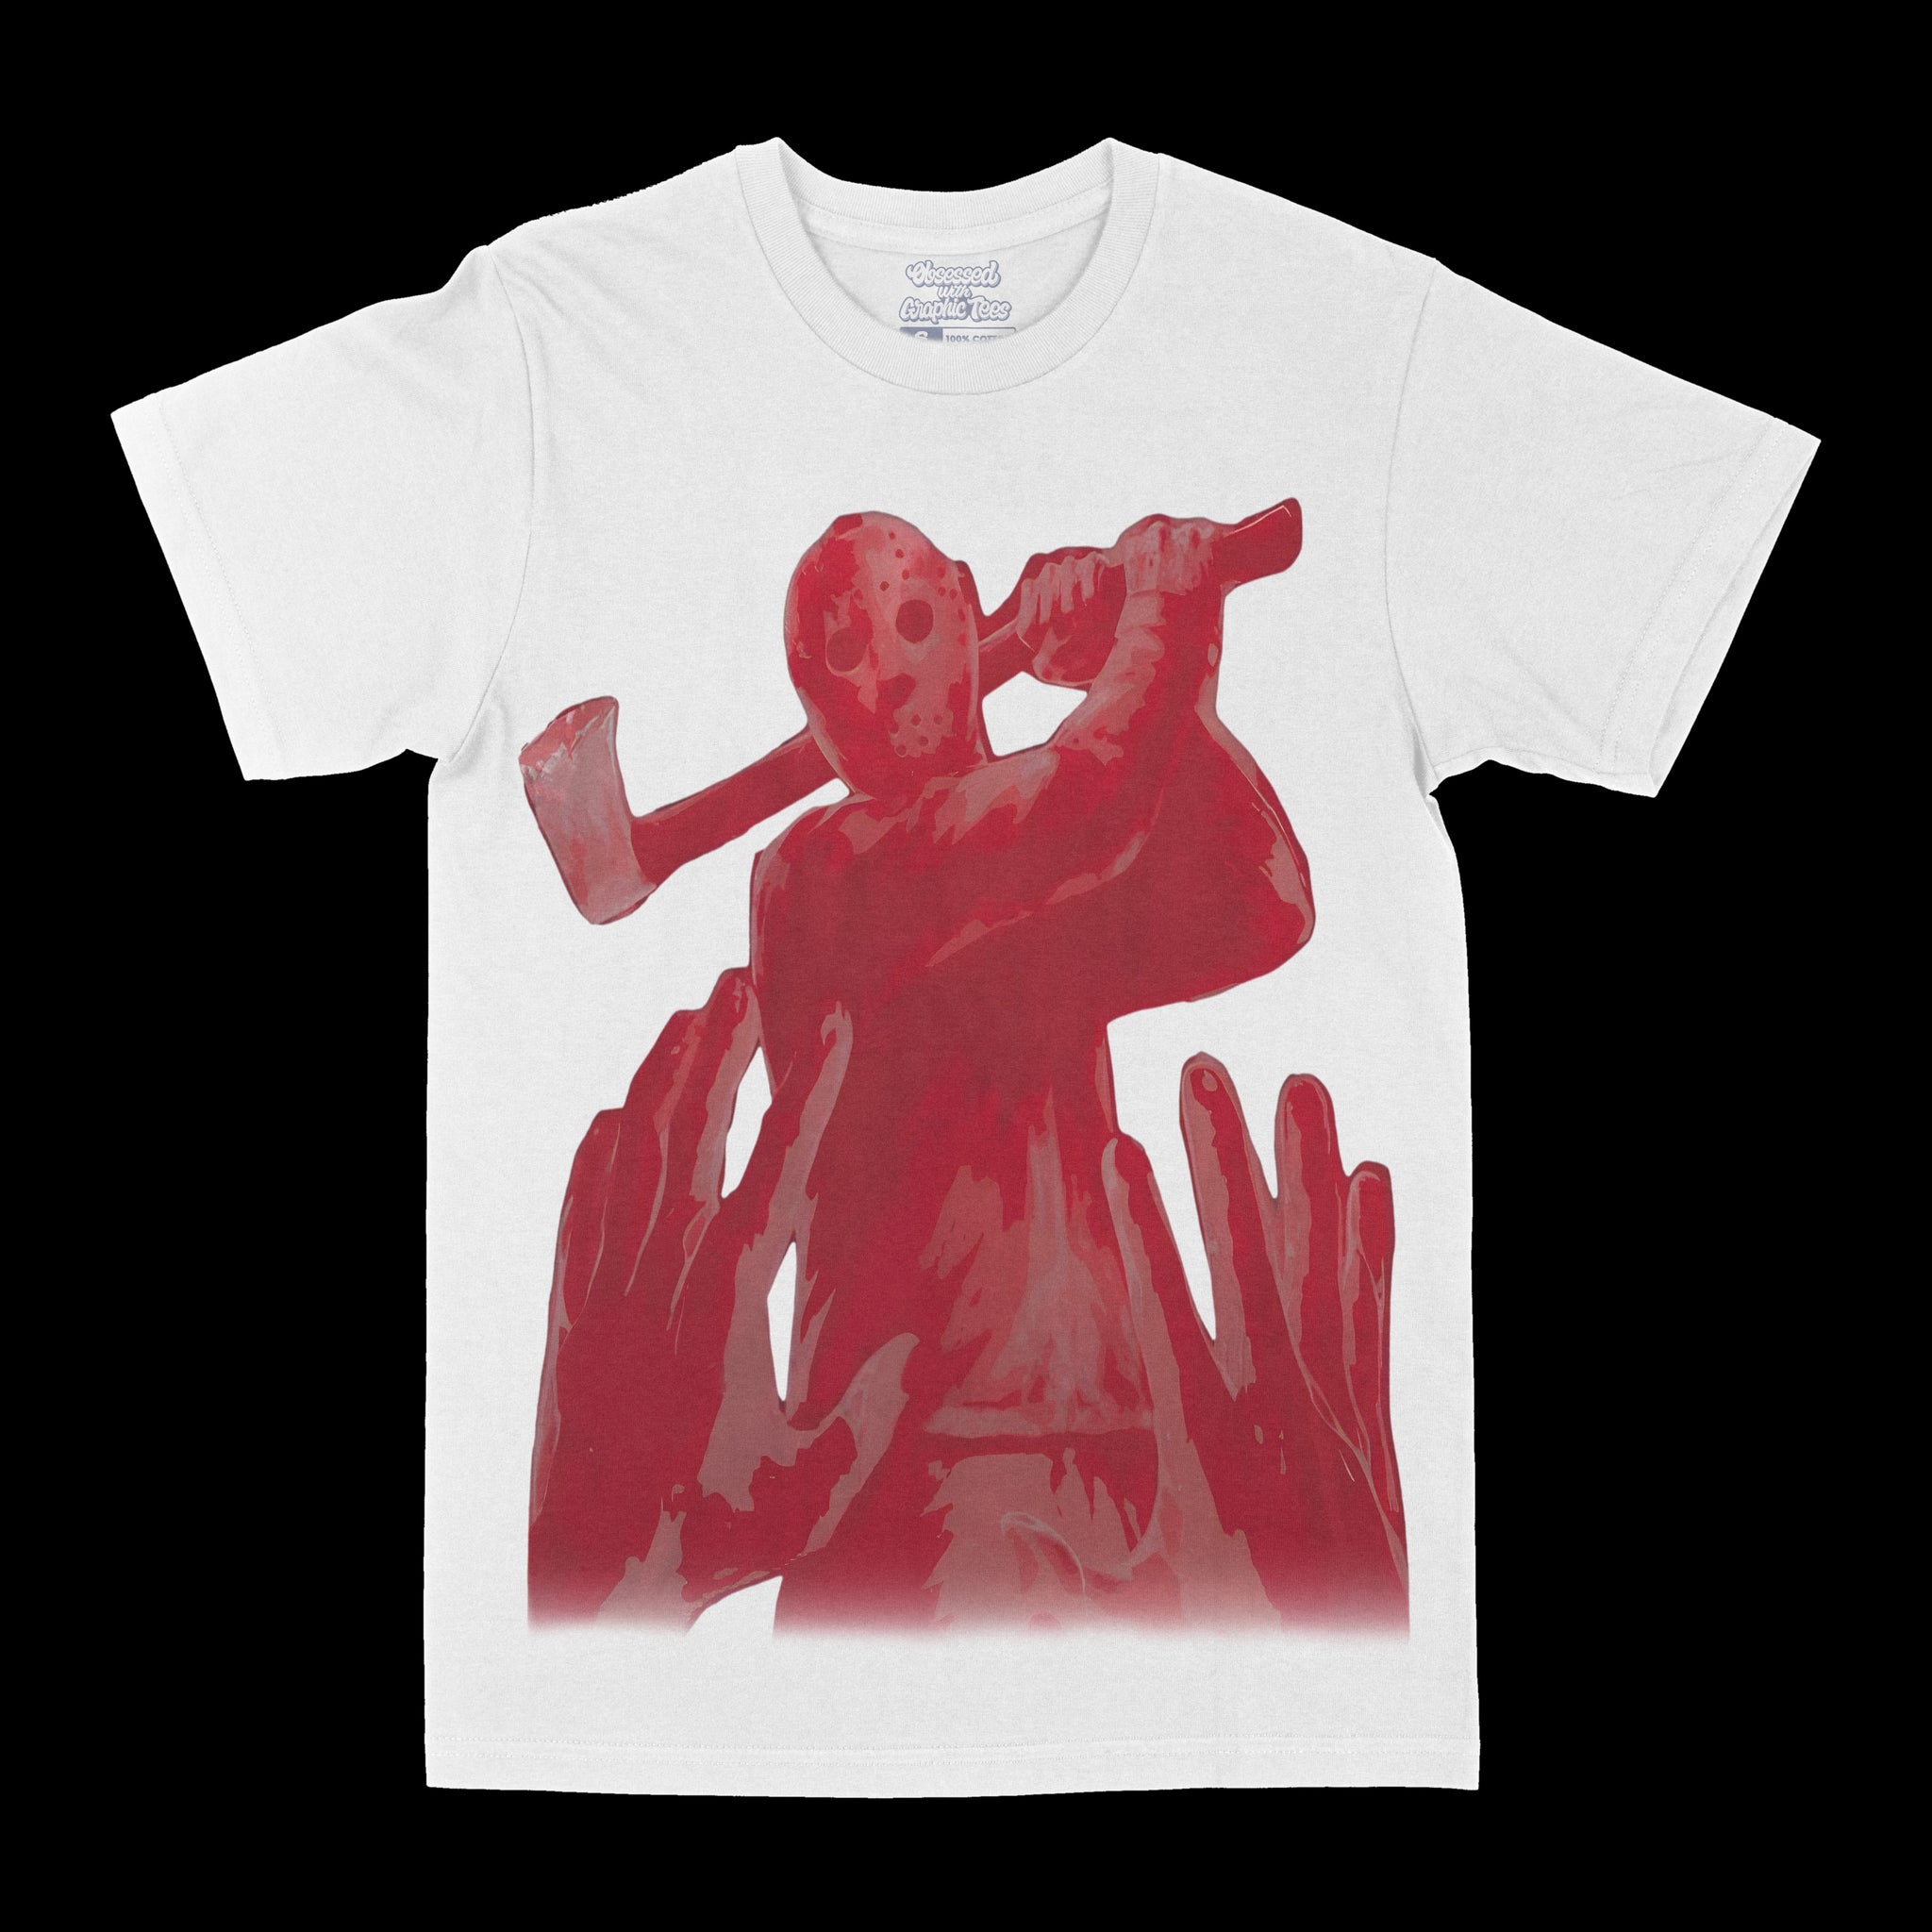 Jason "Bloody Red" Graphic Tee